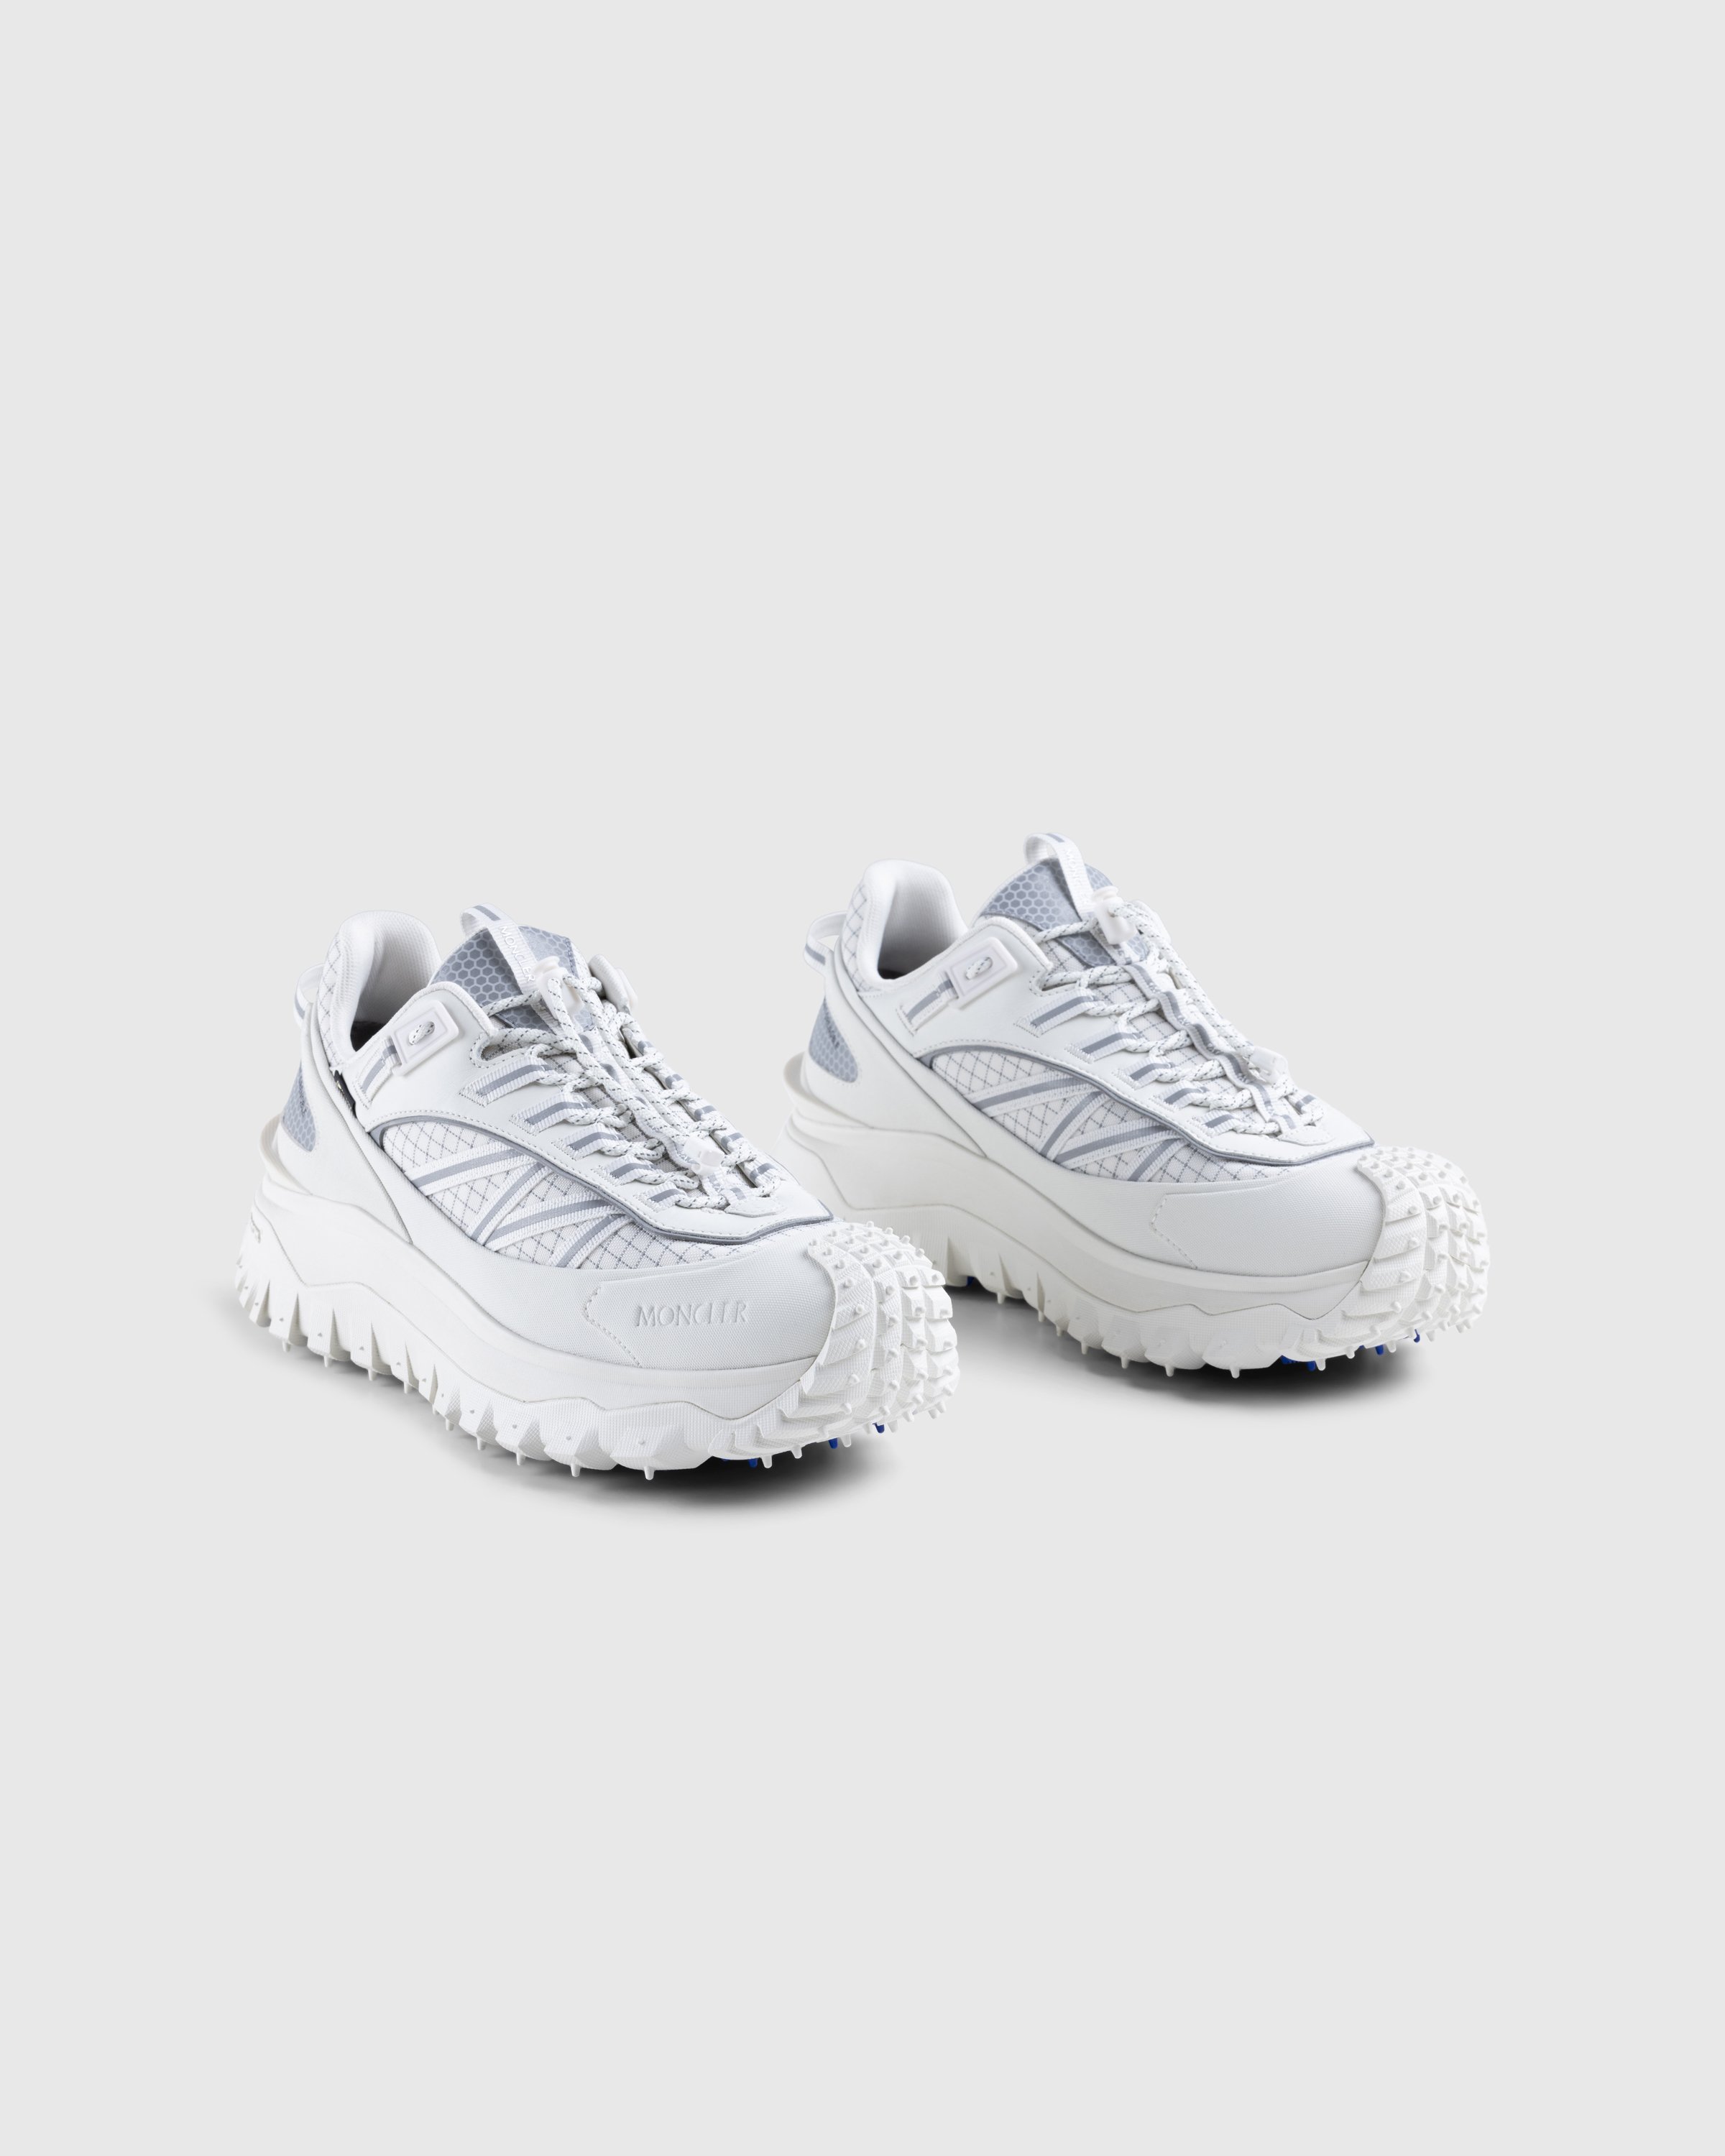 Moncler - Trailgrip GTX Low Top Sneakers White - Footwear - White - Image 3